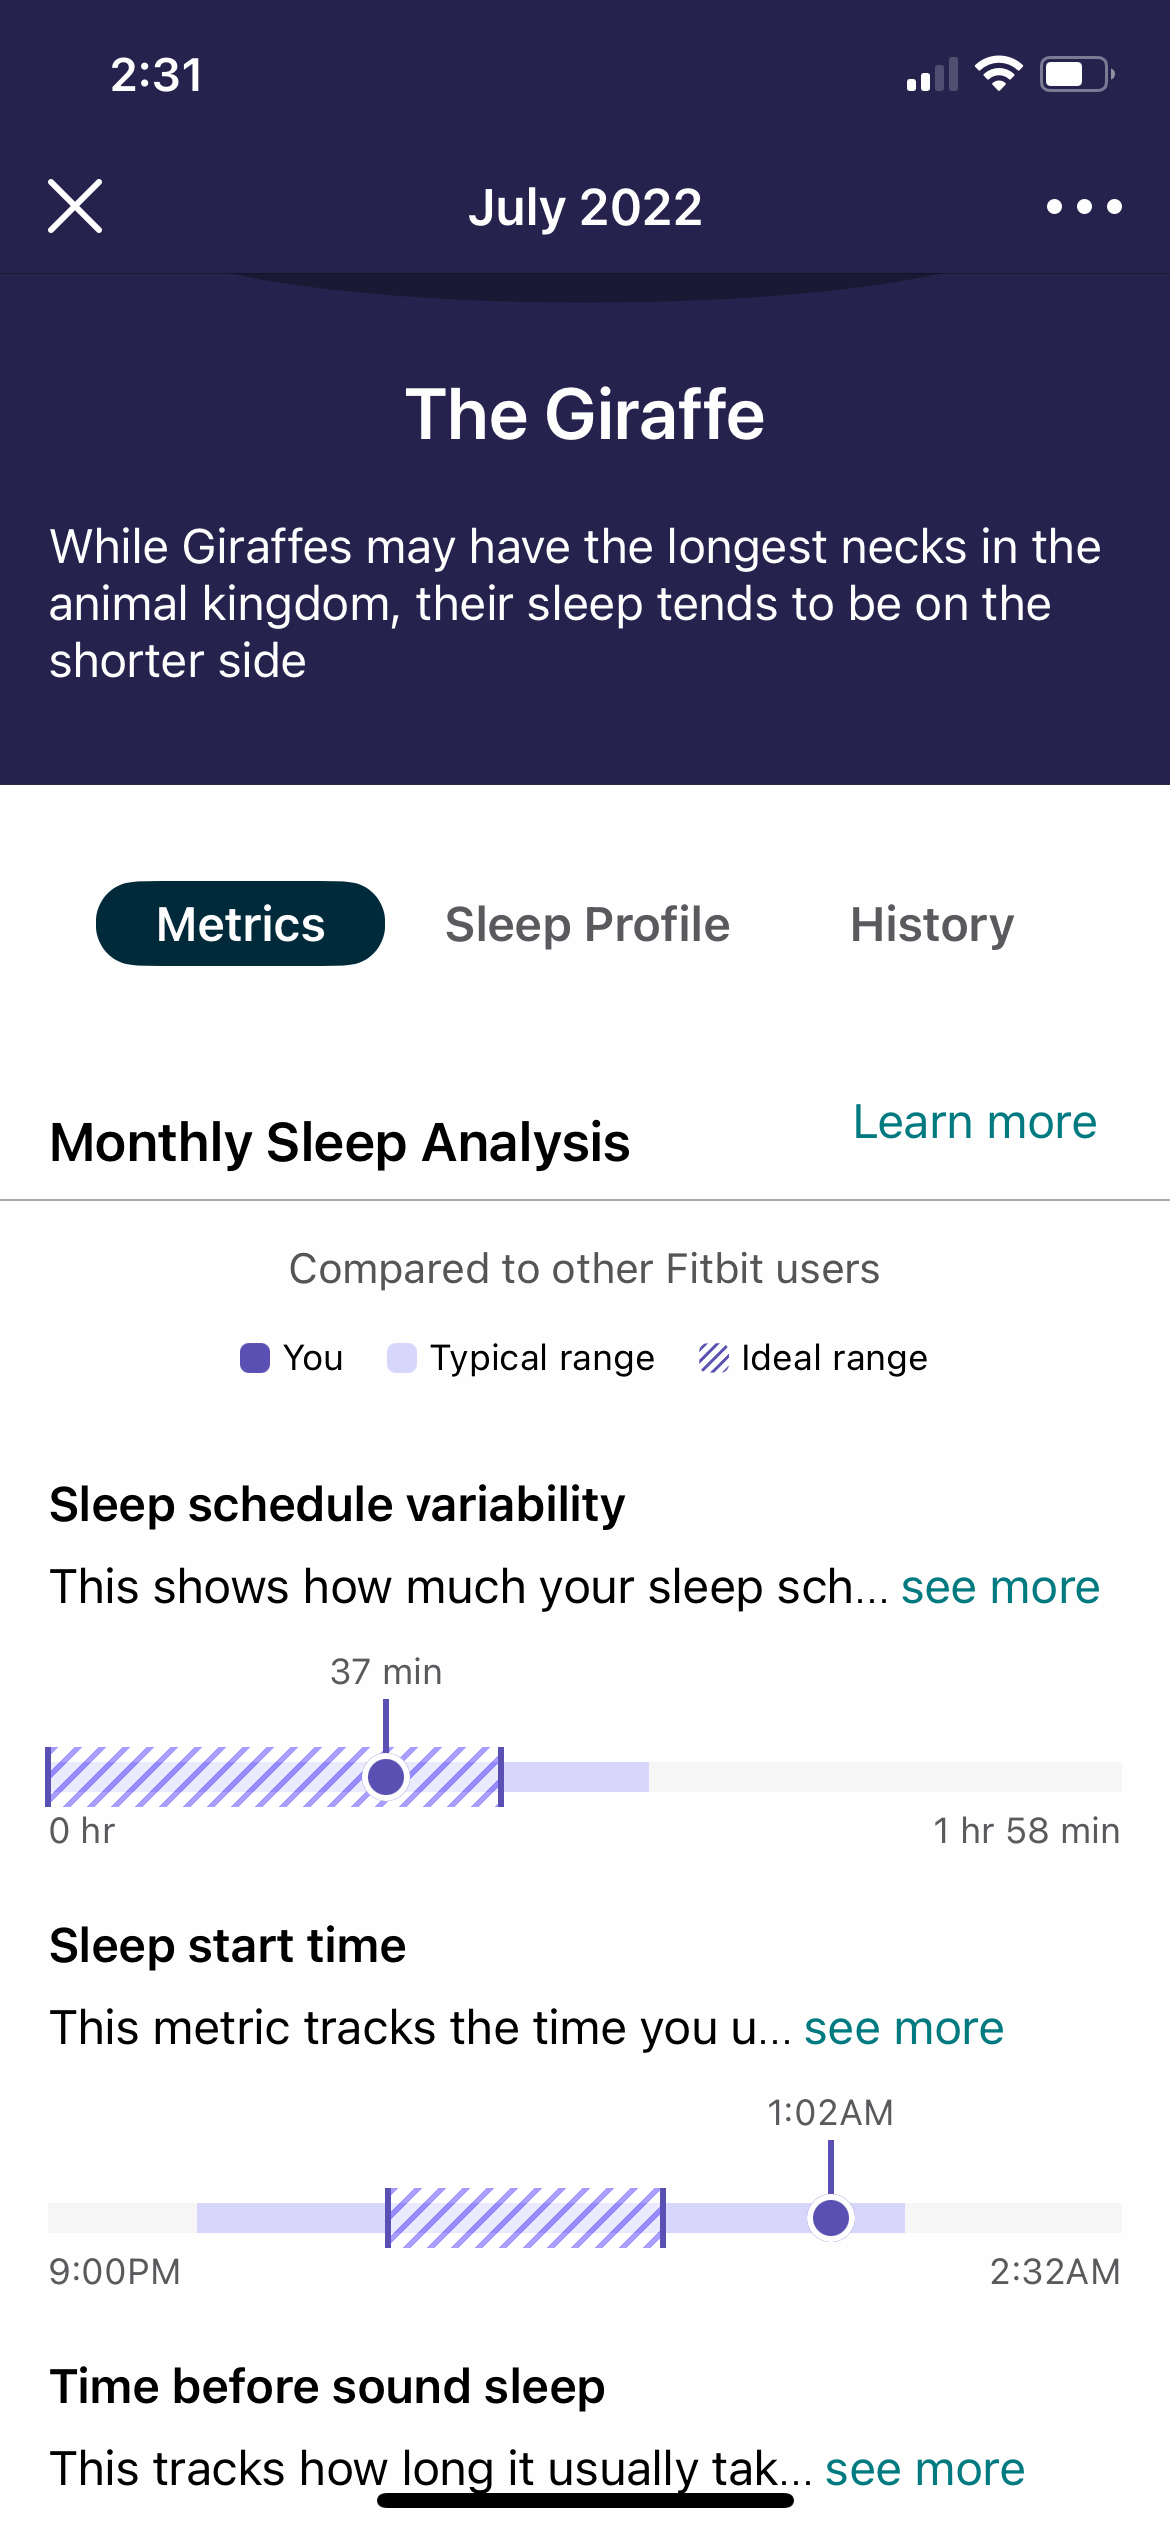 A screenshot of Fitbit's Sleep Profiles feature.